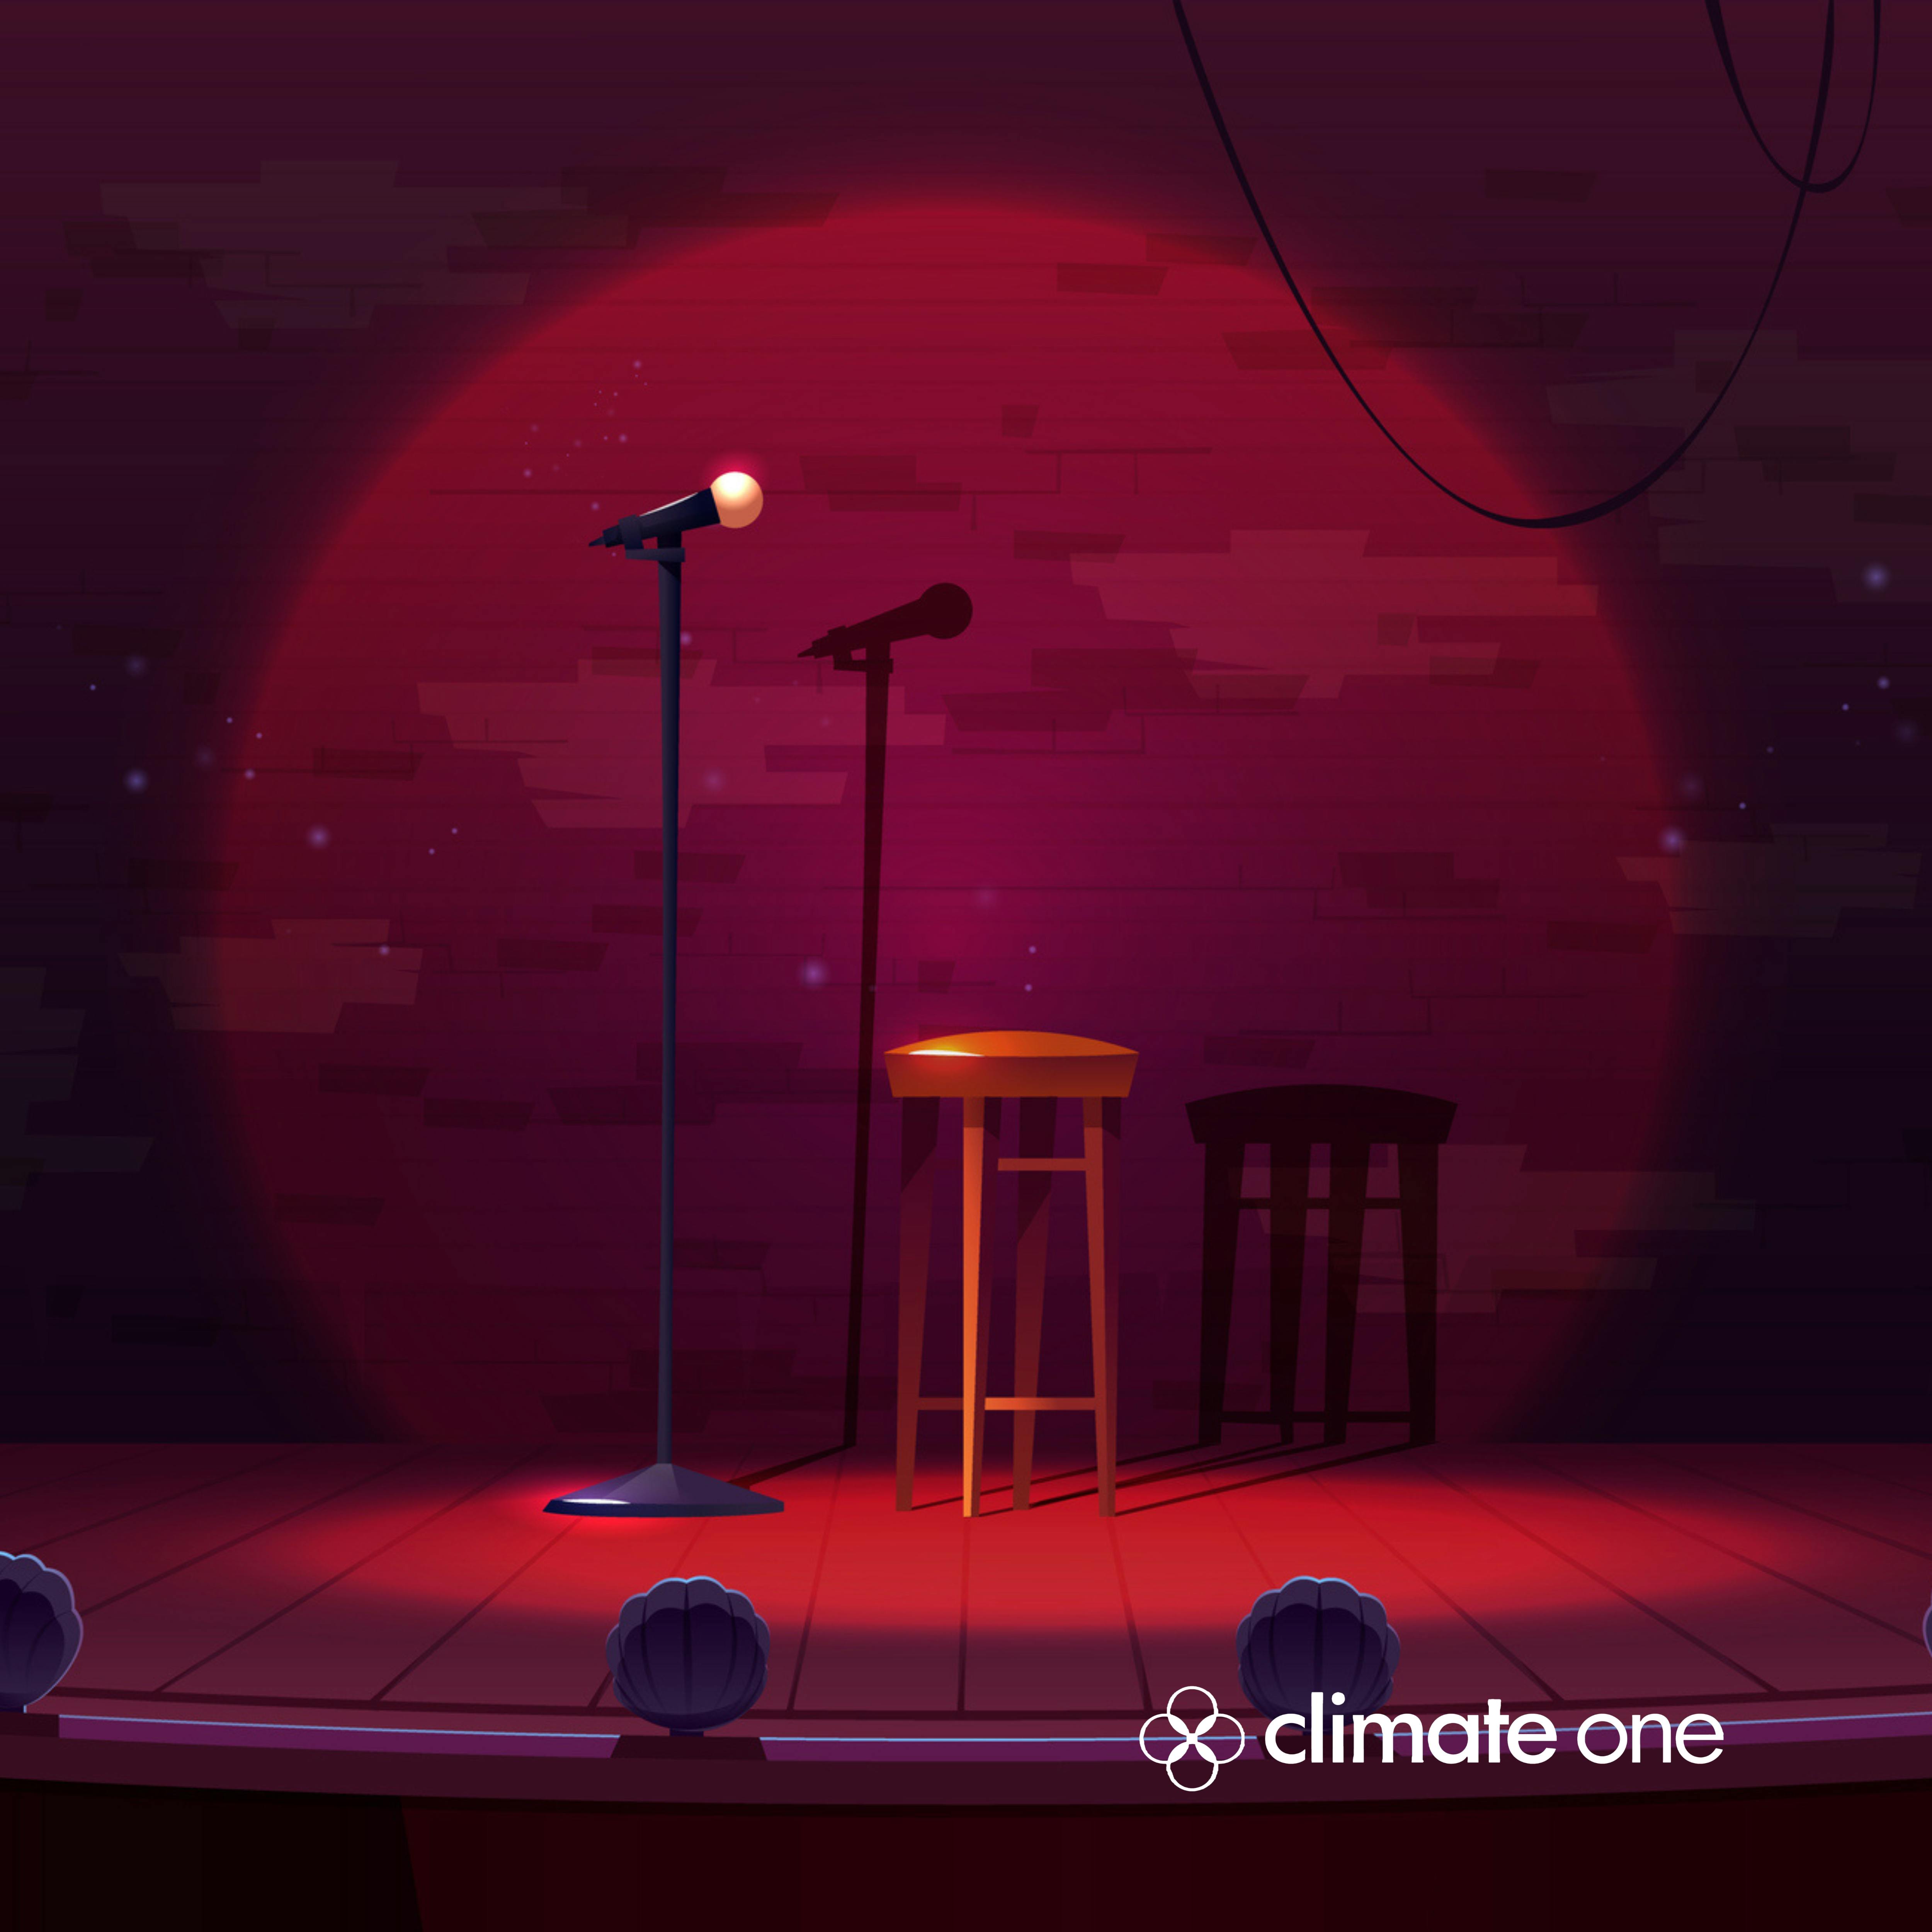 CLIMATE ONE: Is This a Joke? Comedy and Climate Communication